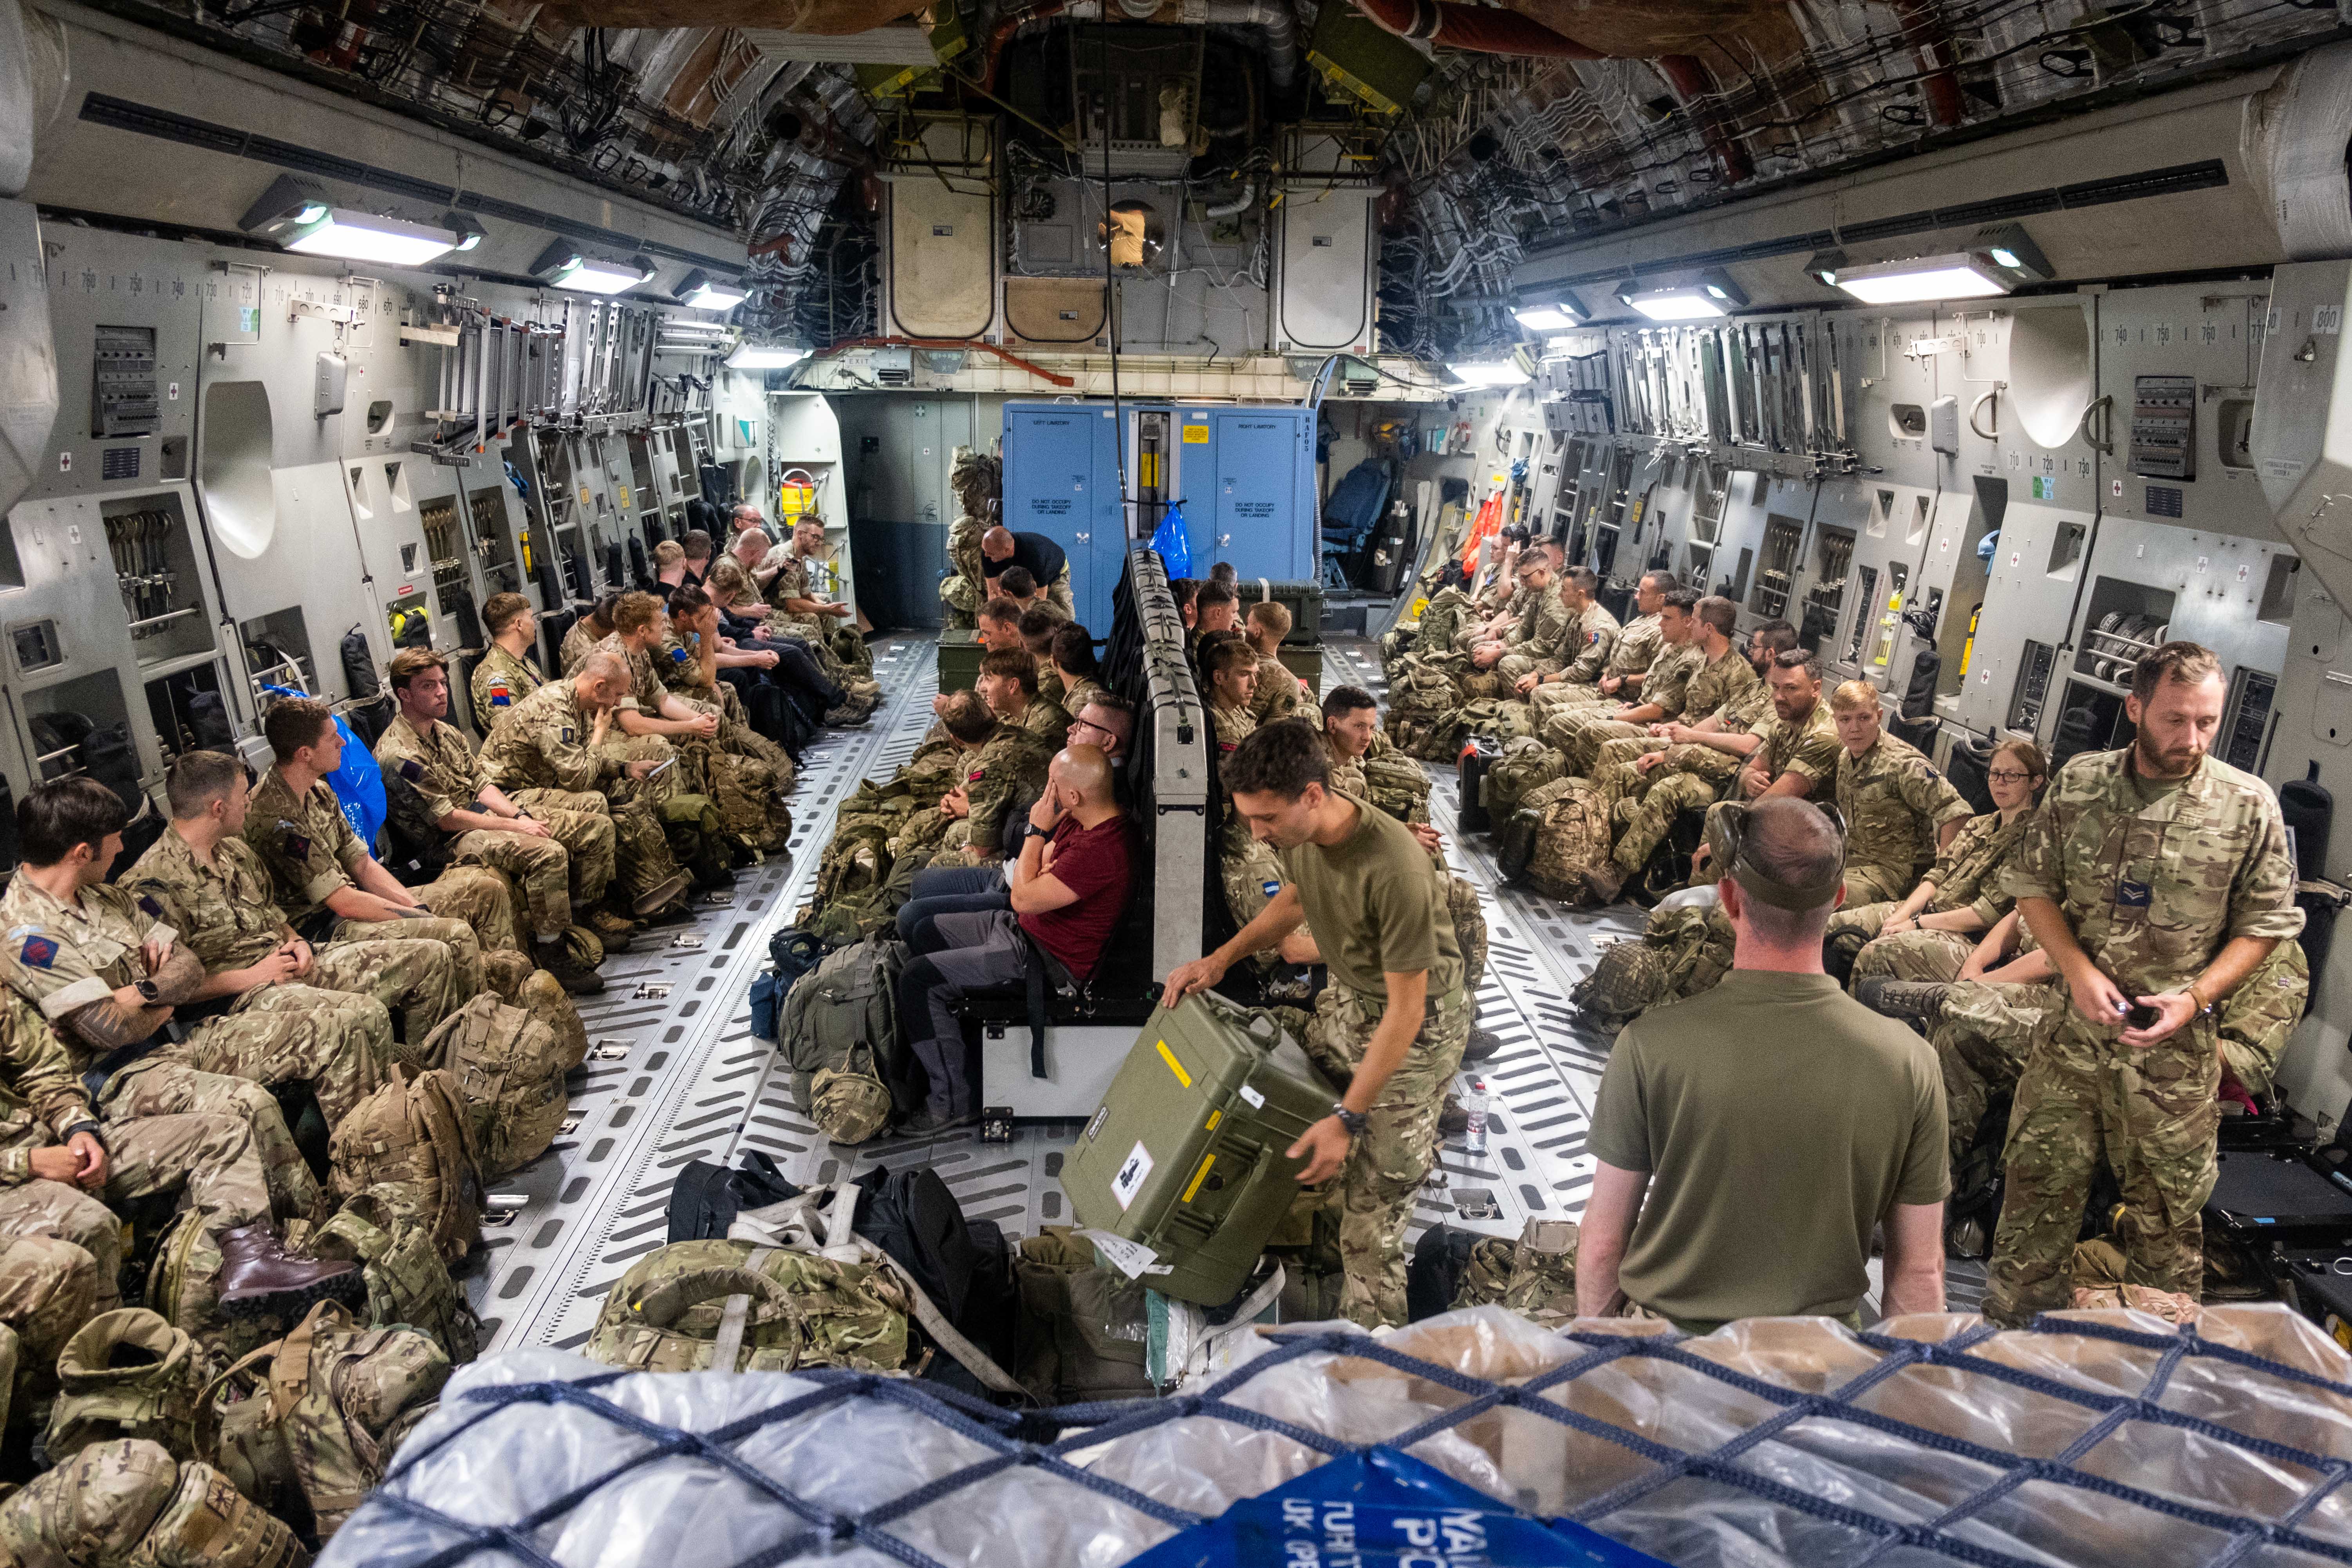 Personnel inside the Globemaster C-17.